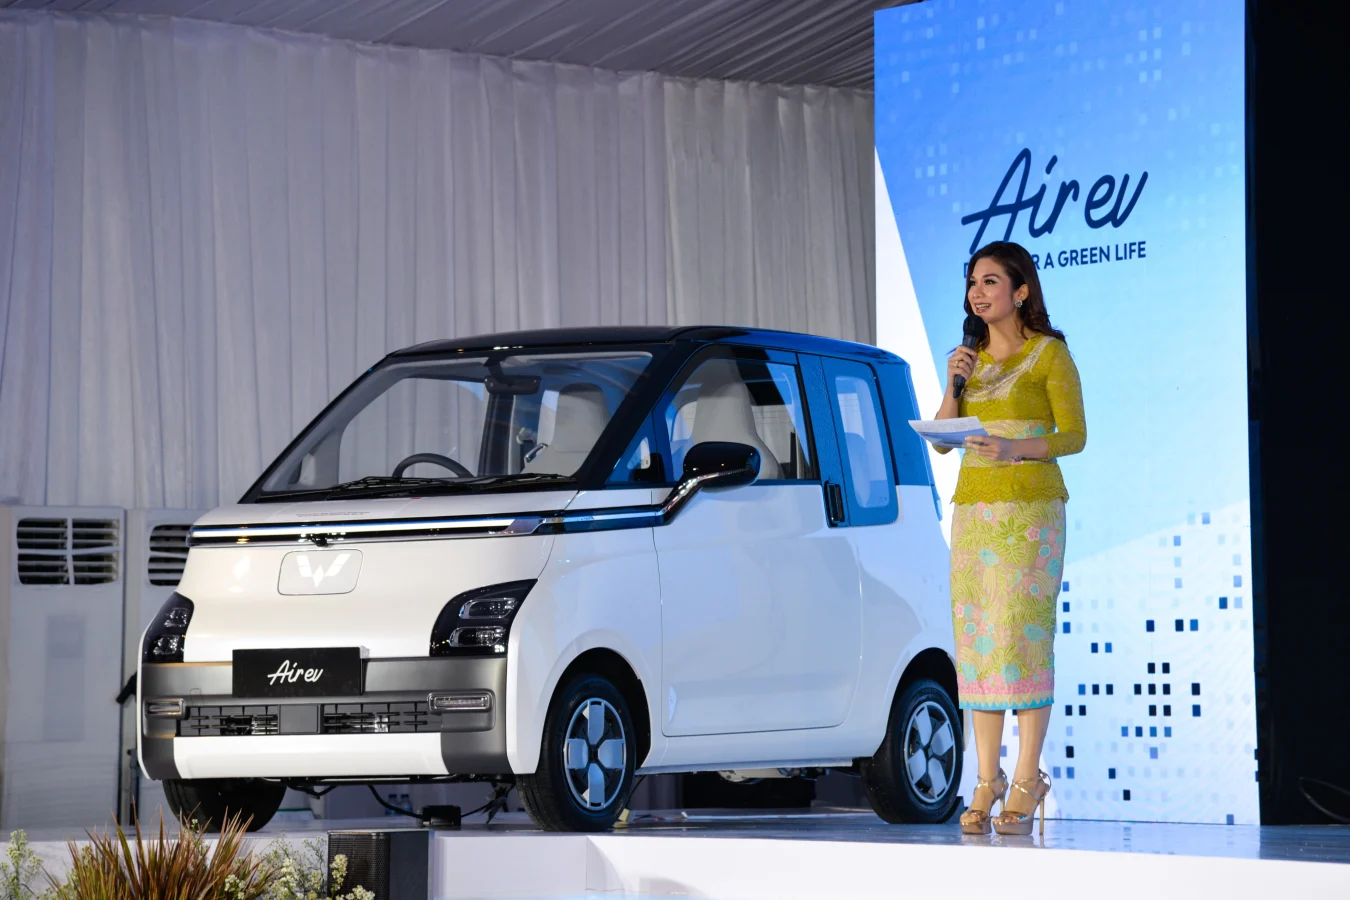 A hostess briefs people on Wuling Air EV during the roll-out ceremony at Wuling's production factory in Bekasi, West Java province, Indonesia, Aug. 8, 2022. SAIC-GM-Wuling SGMW, a major Chinese automobile manufacturer, through its local unit SGMW Motor Indonesia Wuling, on Monday launched here its production of the electric vehicle in Indonesia, named Wuling Air EV. (Photo by Xu Qin/Xinhua via Getty Images)